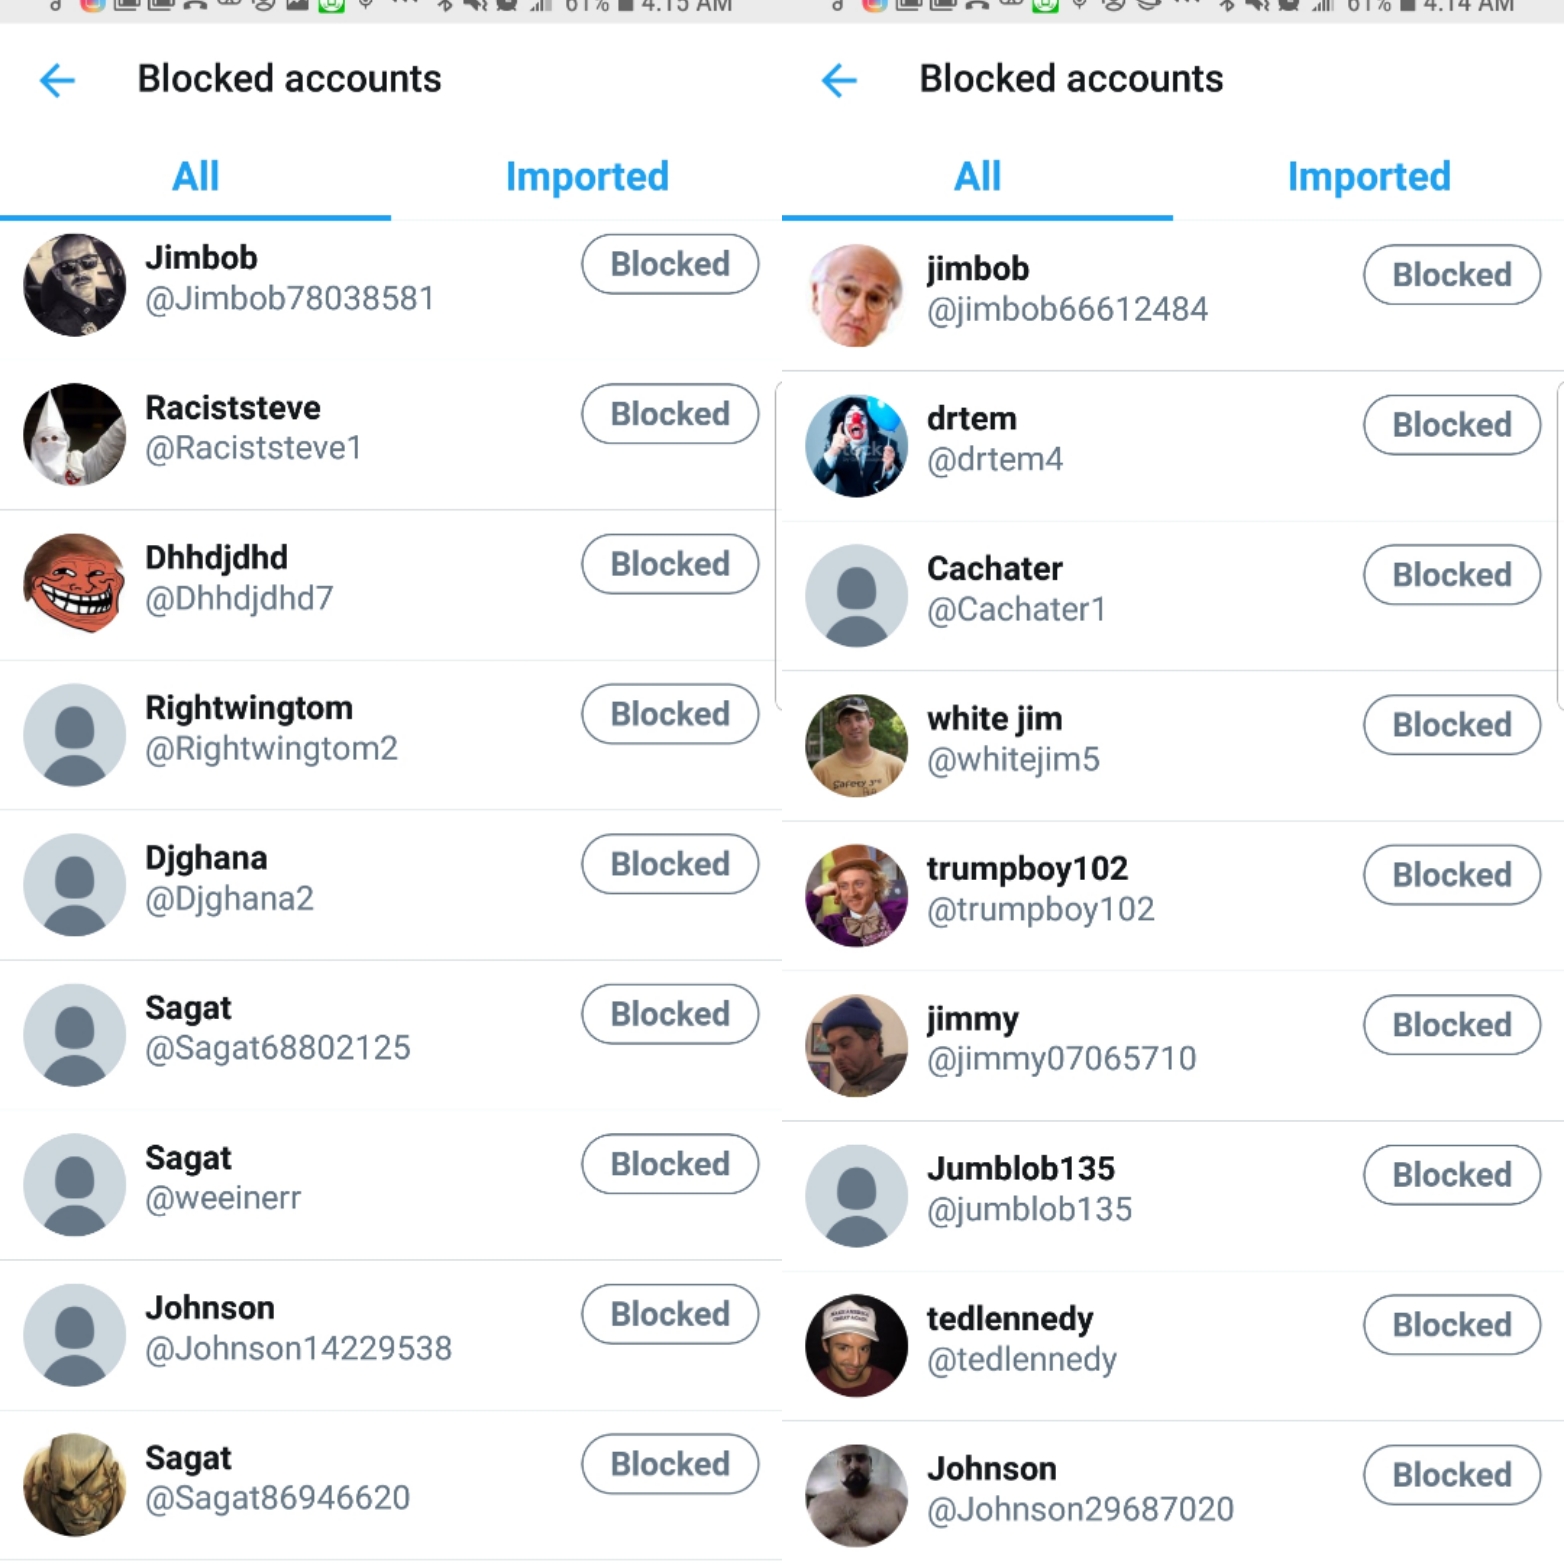 More accounts Thomas used to harass me on Twitter